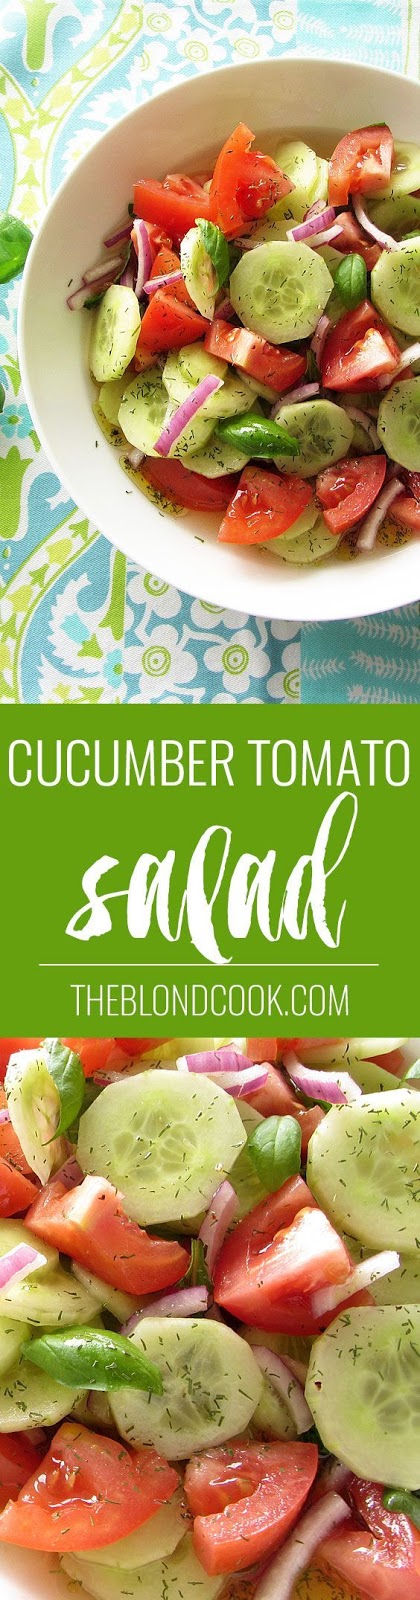 A simple, healthy recipe for cucumber tomato salad with red onions, basil & a homemade vinaigrette dressing.